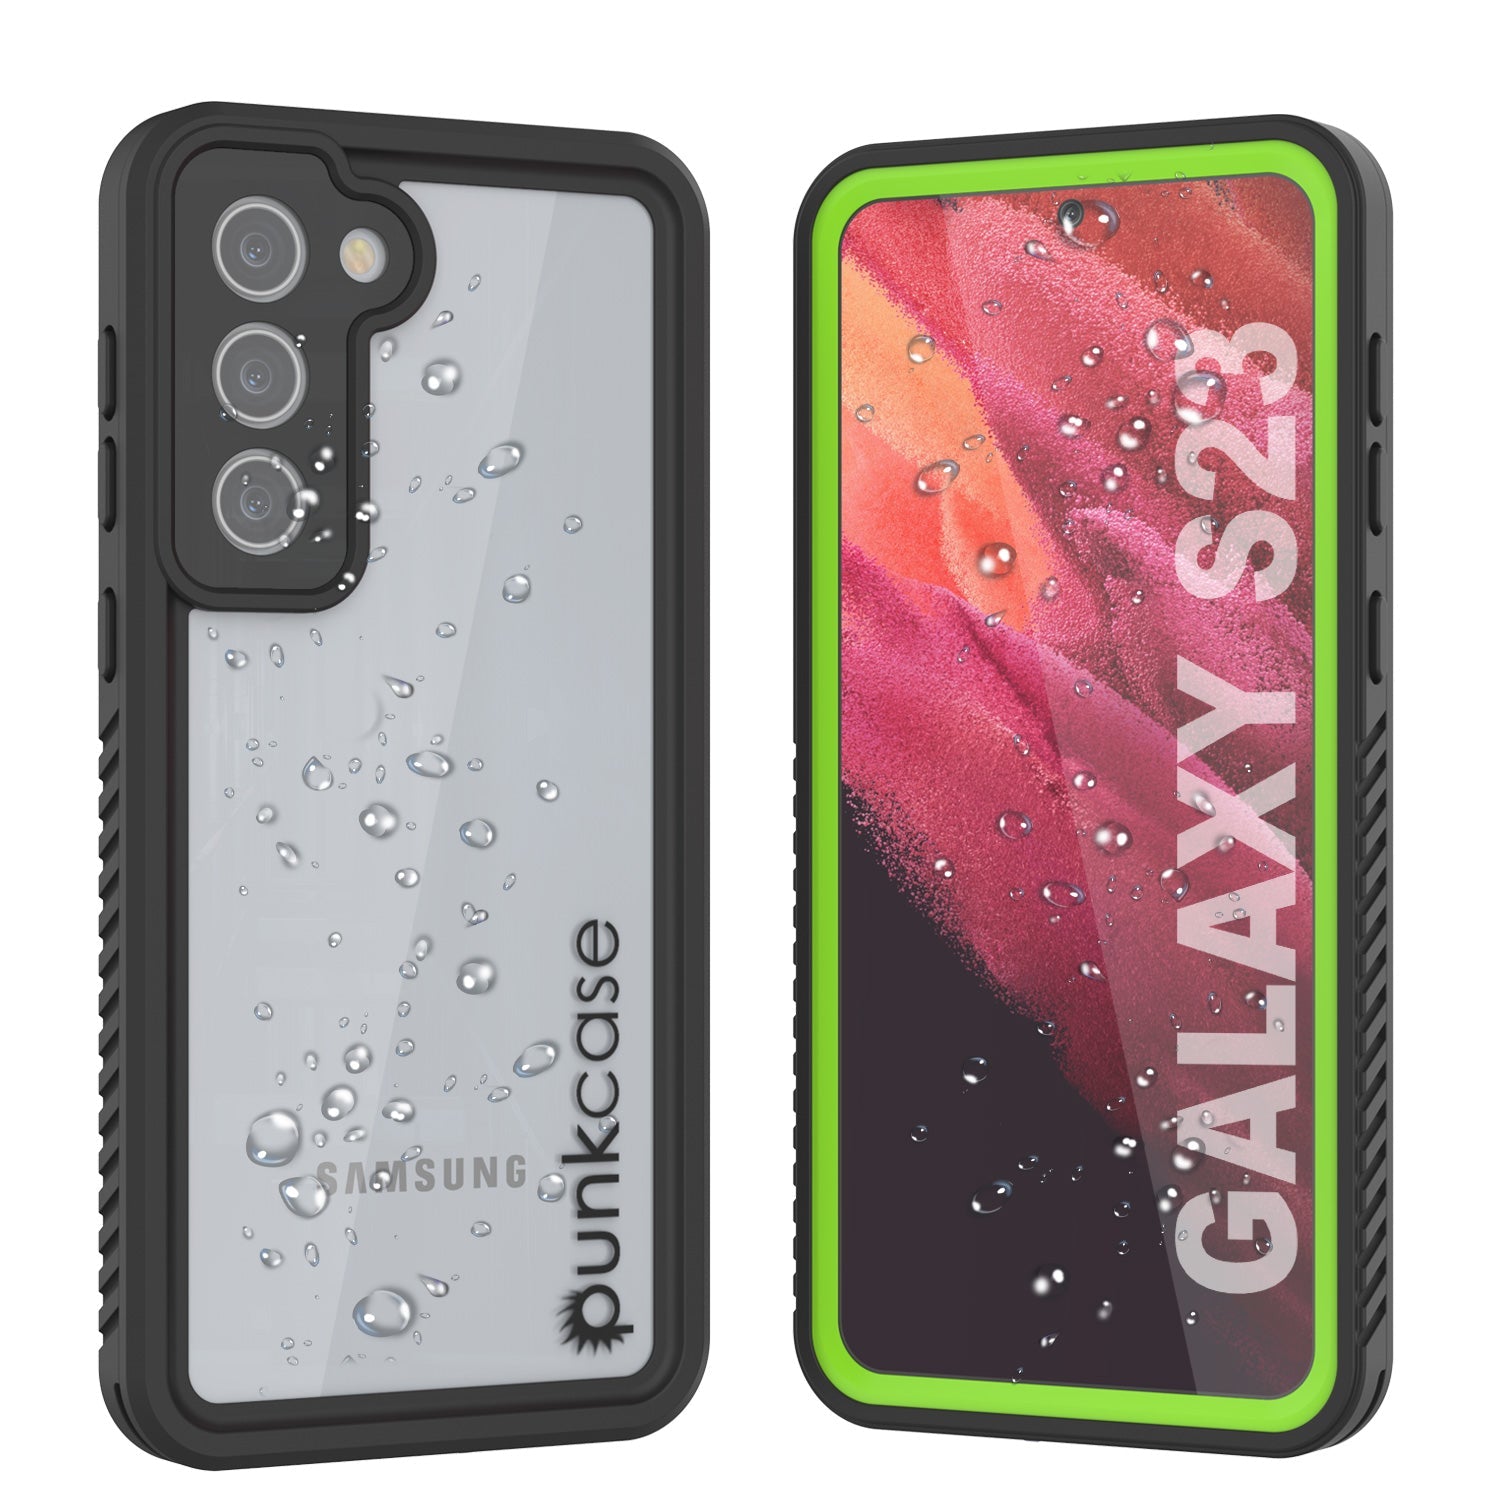 Galaxy S23 Water/ Shockproof [Extreme Series] Screen Protector Case [Light Green]